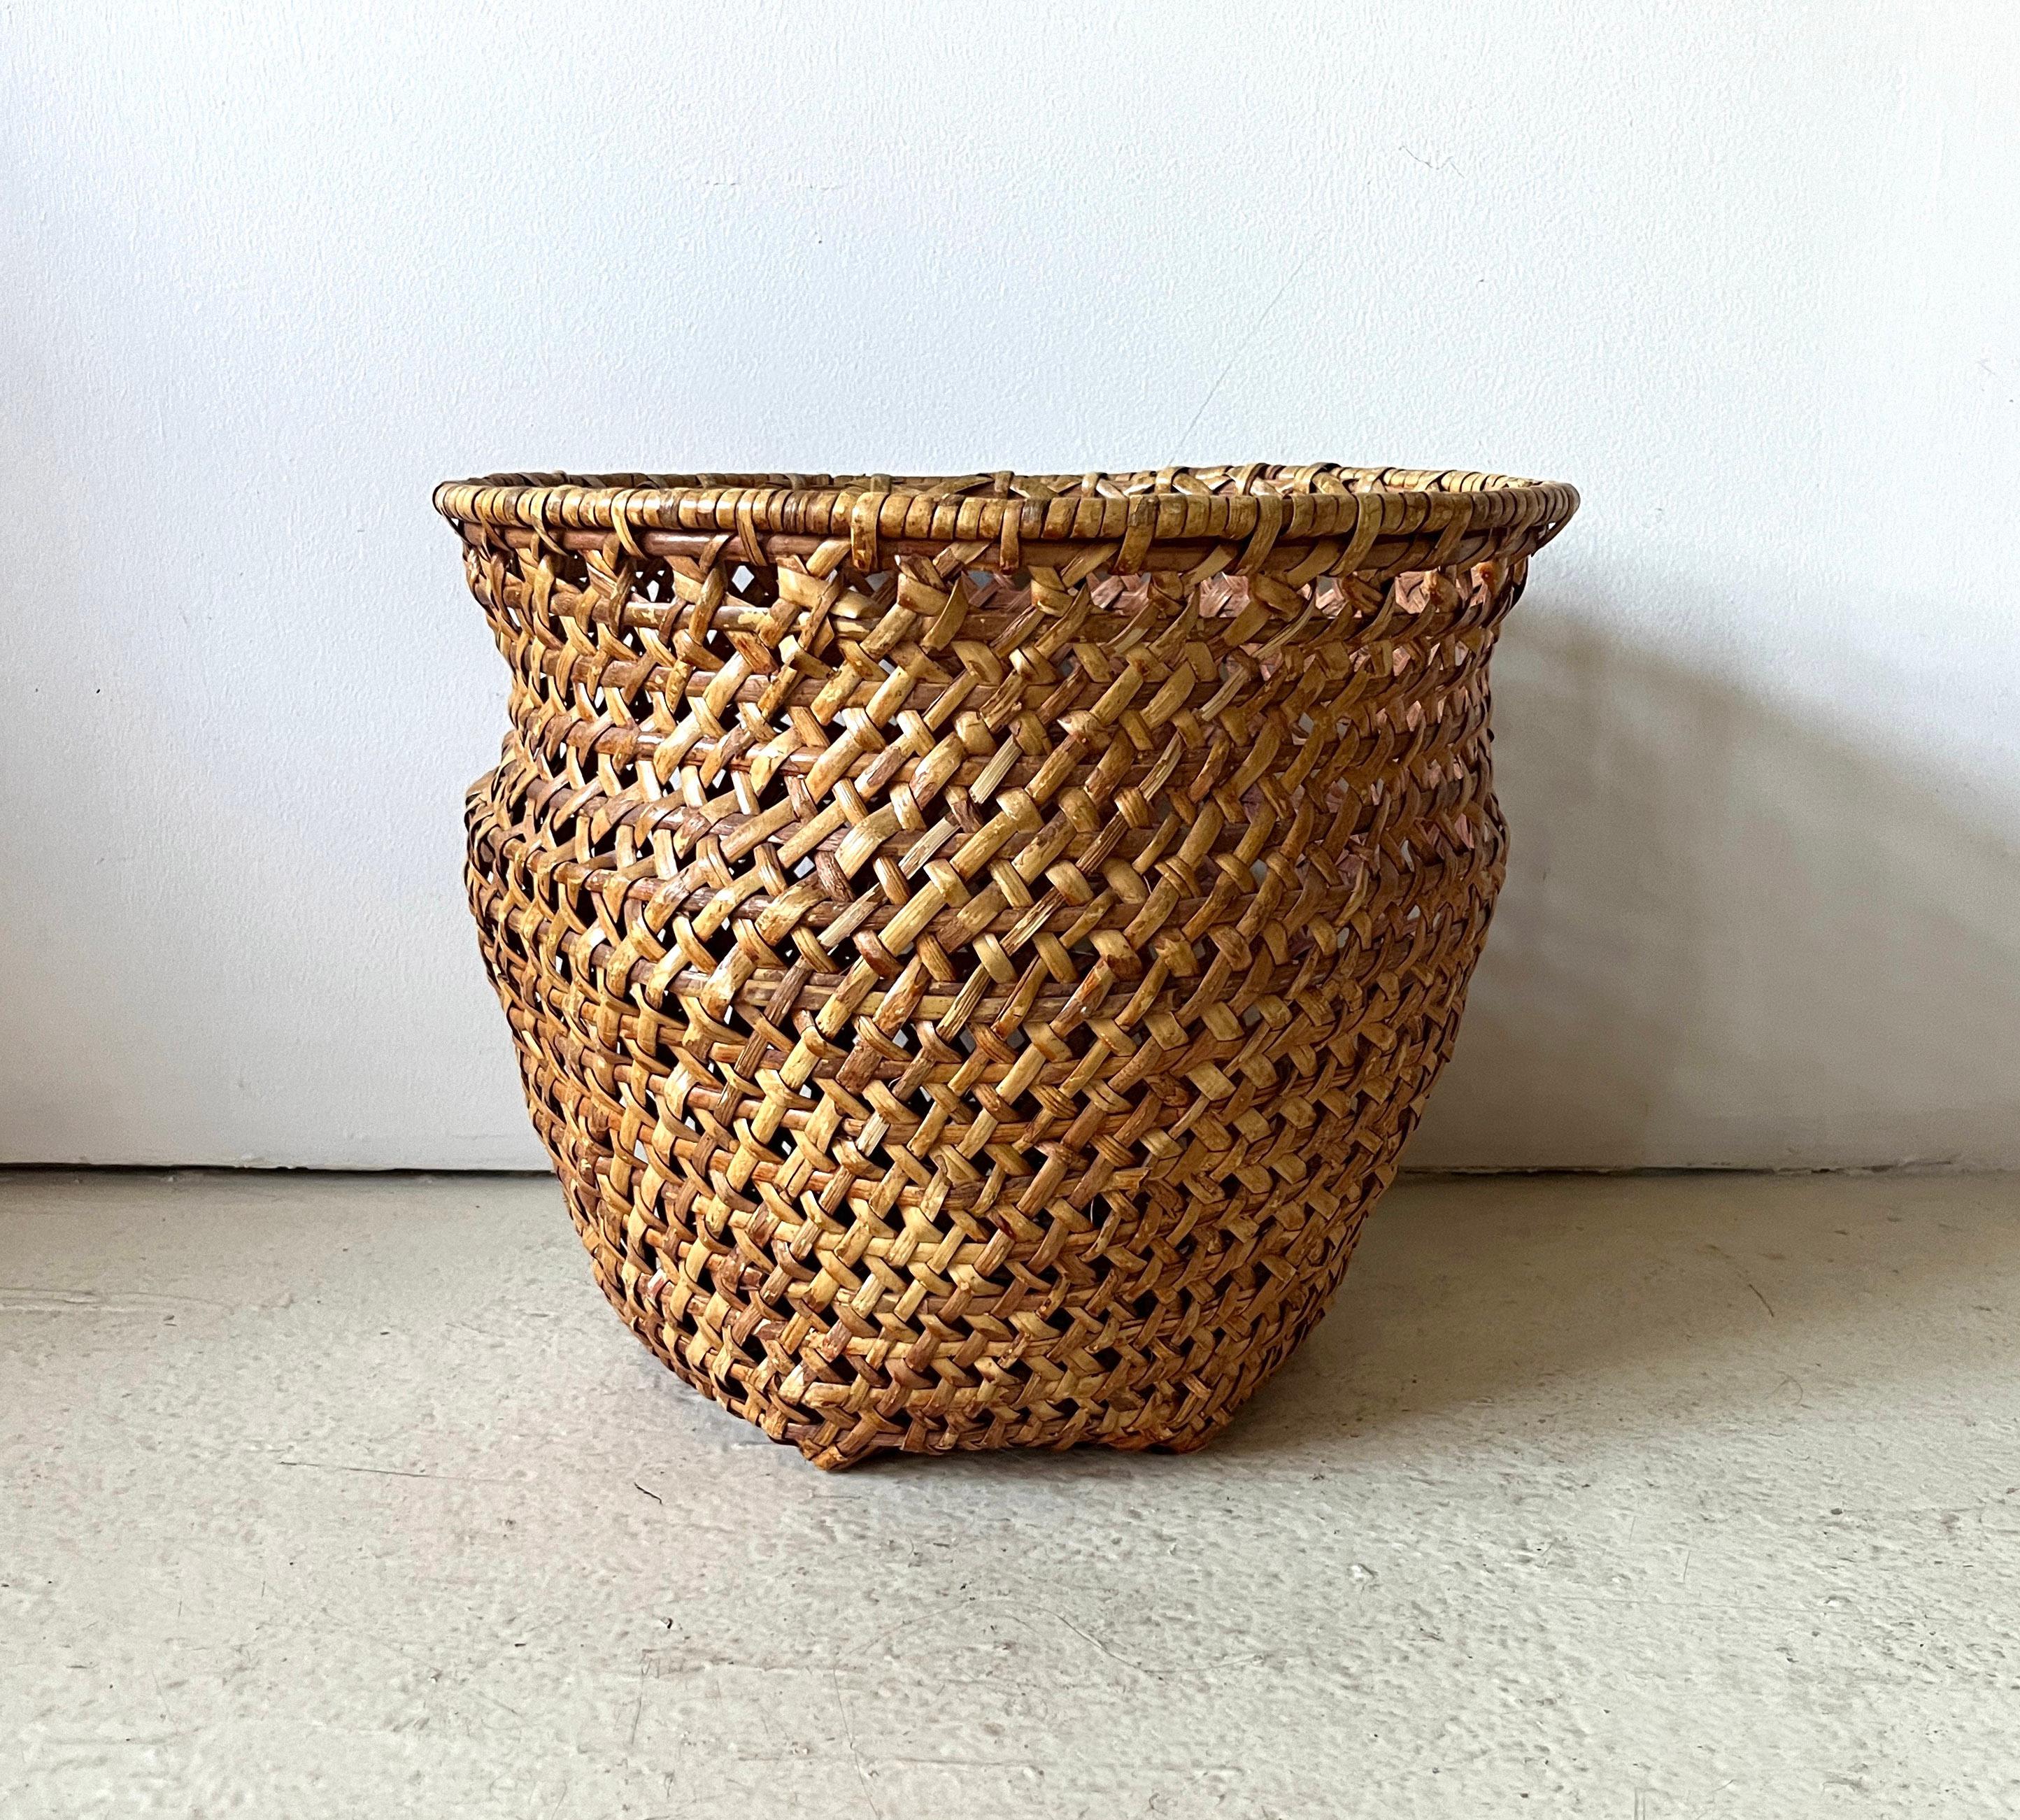 Sturdy and handsome woven urn-shaped basket of warm brown wicker or rattan with 1960s bohemian vibes. Tightly woven with hexagonal base. Great for storage, decor or to hold a potted plant. 

Very good to excellent vintage condition. No breaks or